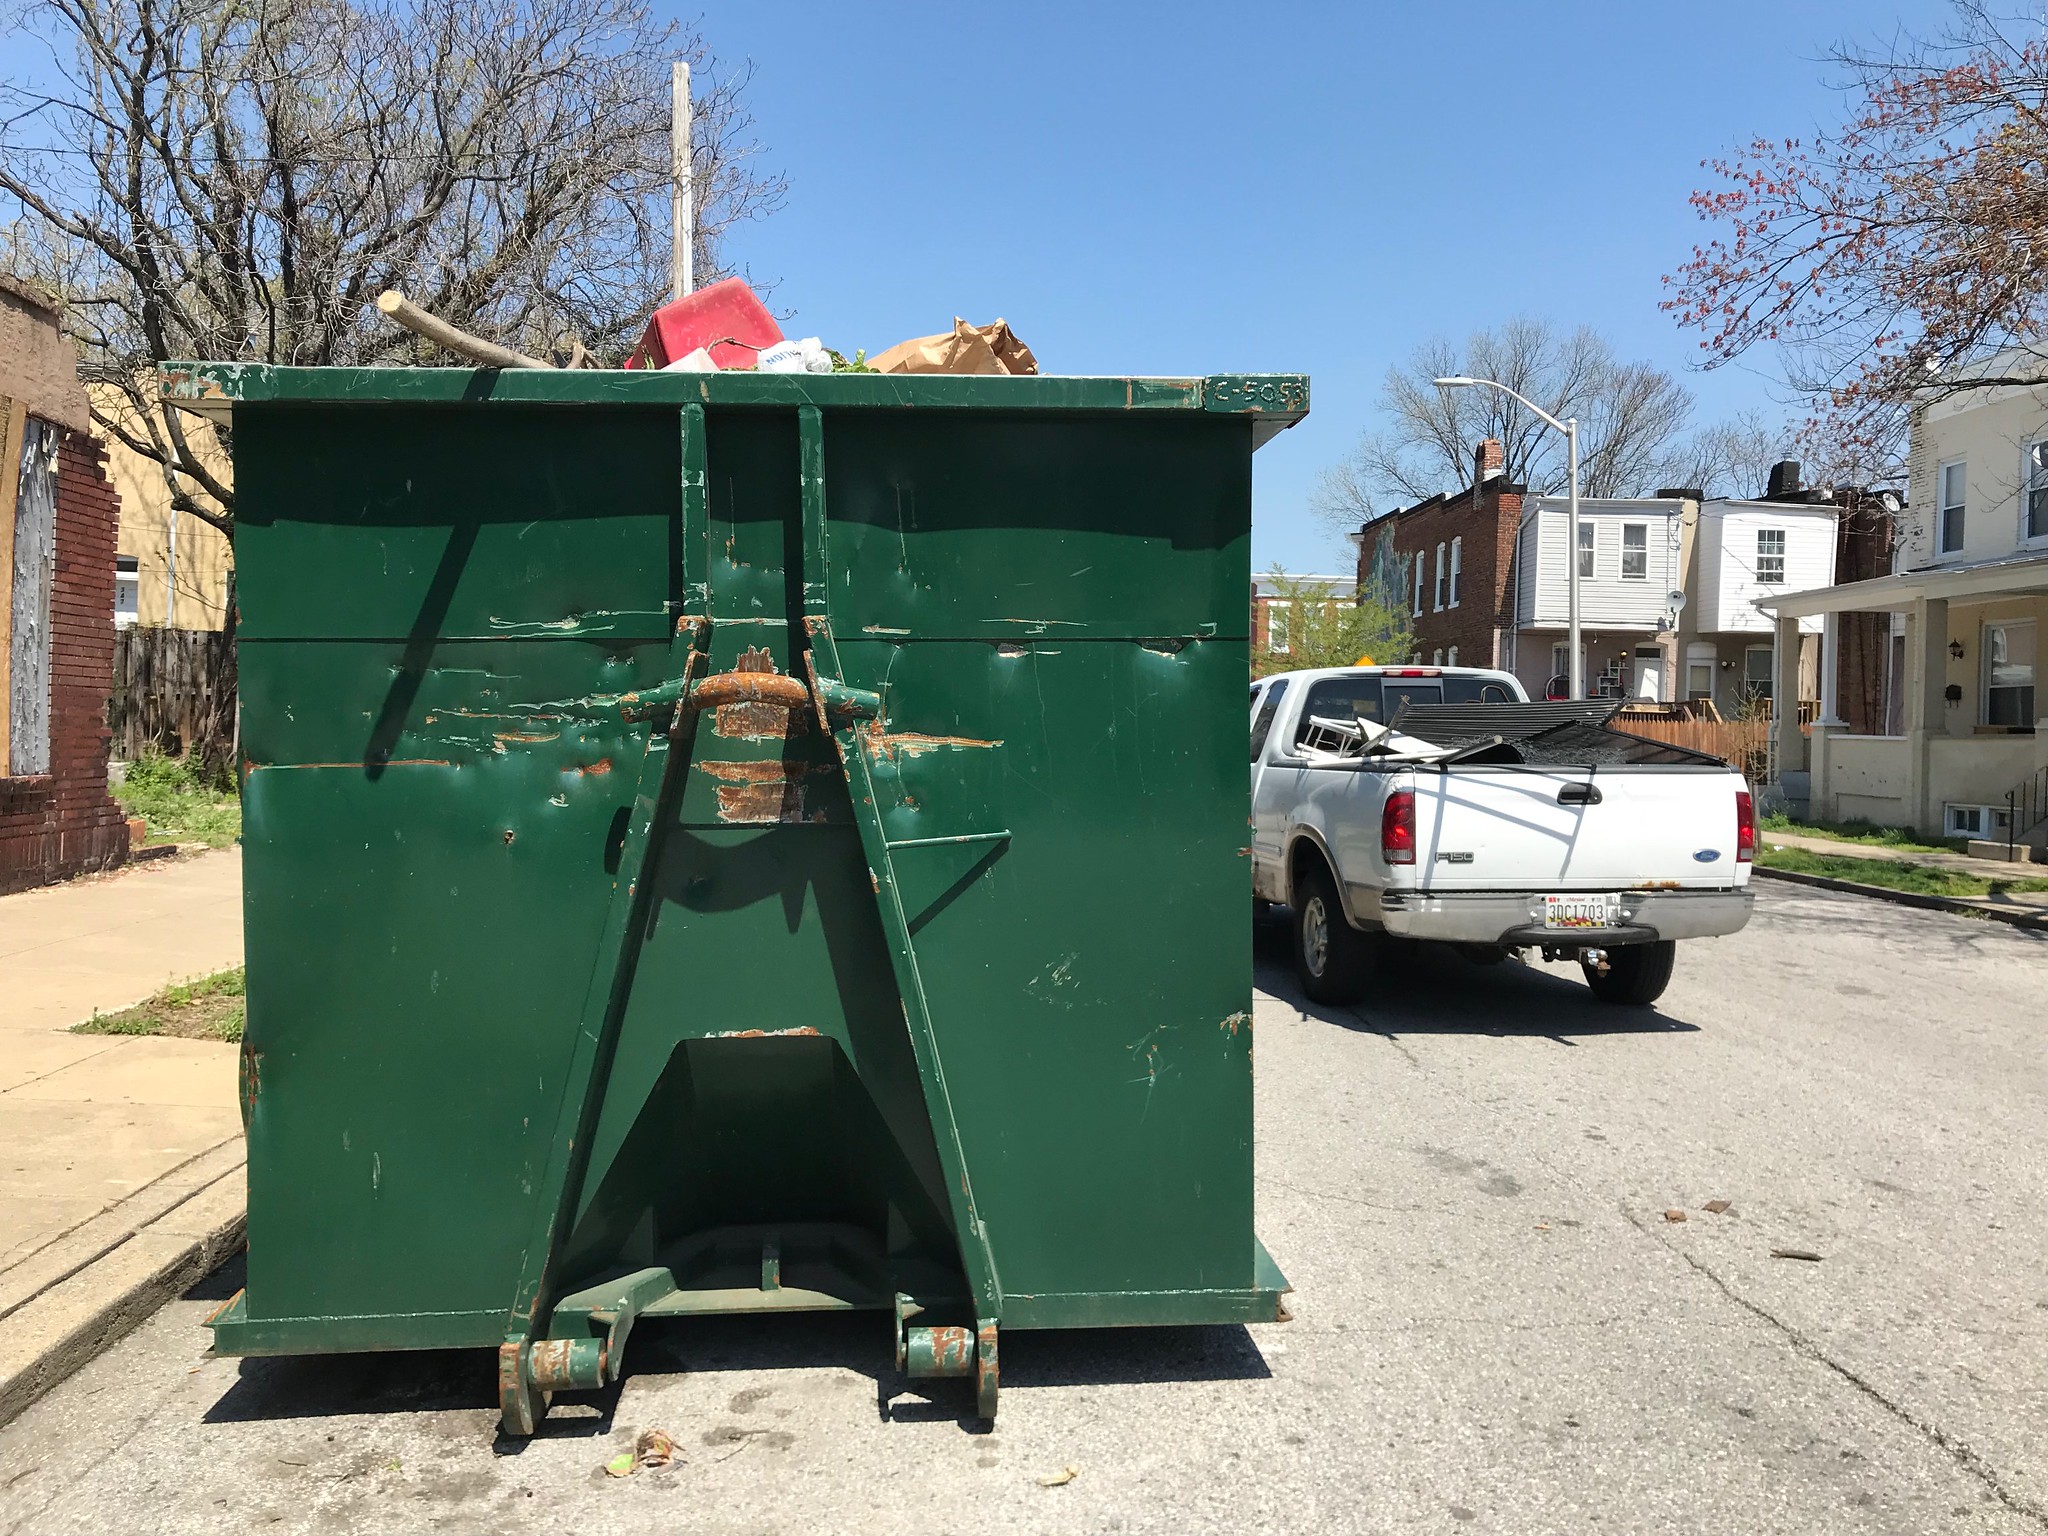 Dumpster Rental company roll off dumpsters for rent in Hutchinson KS